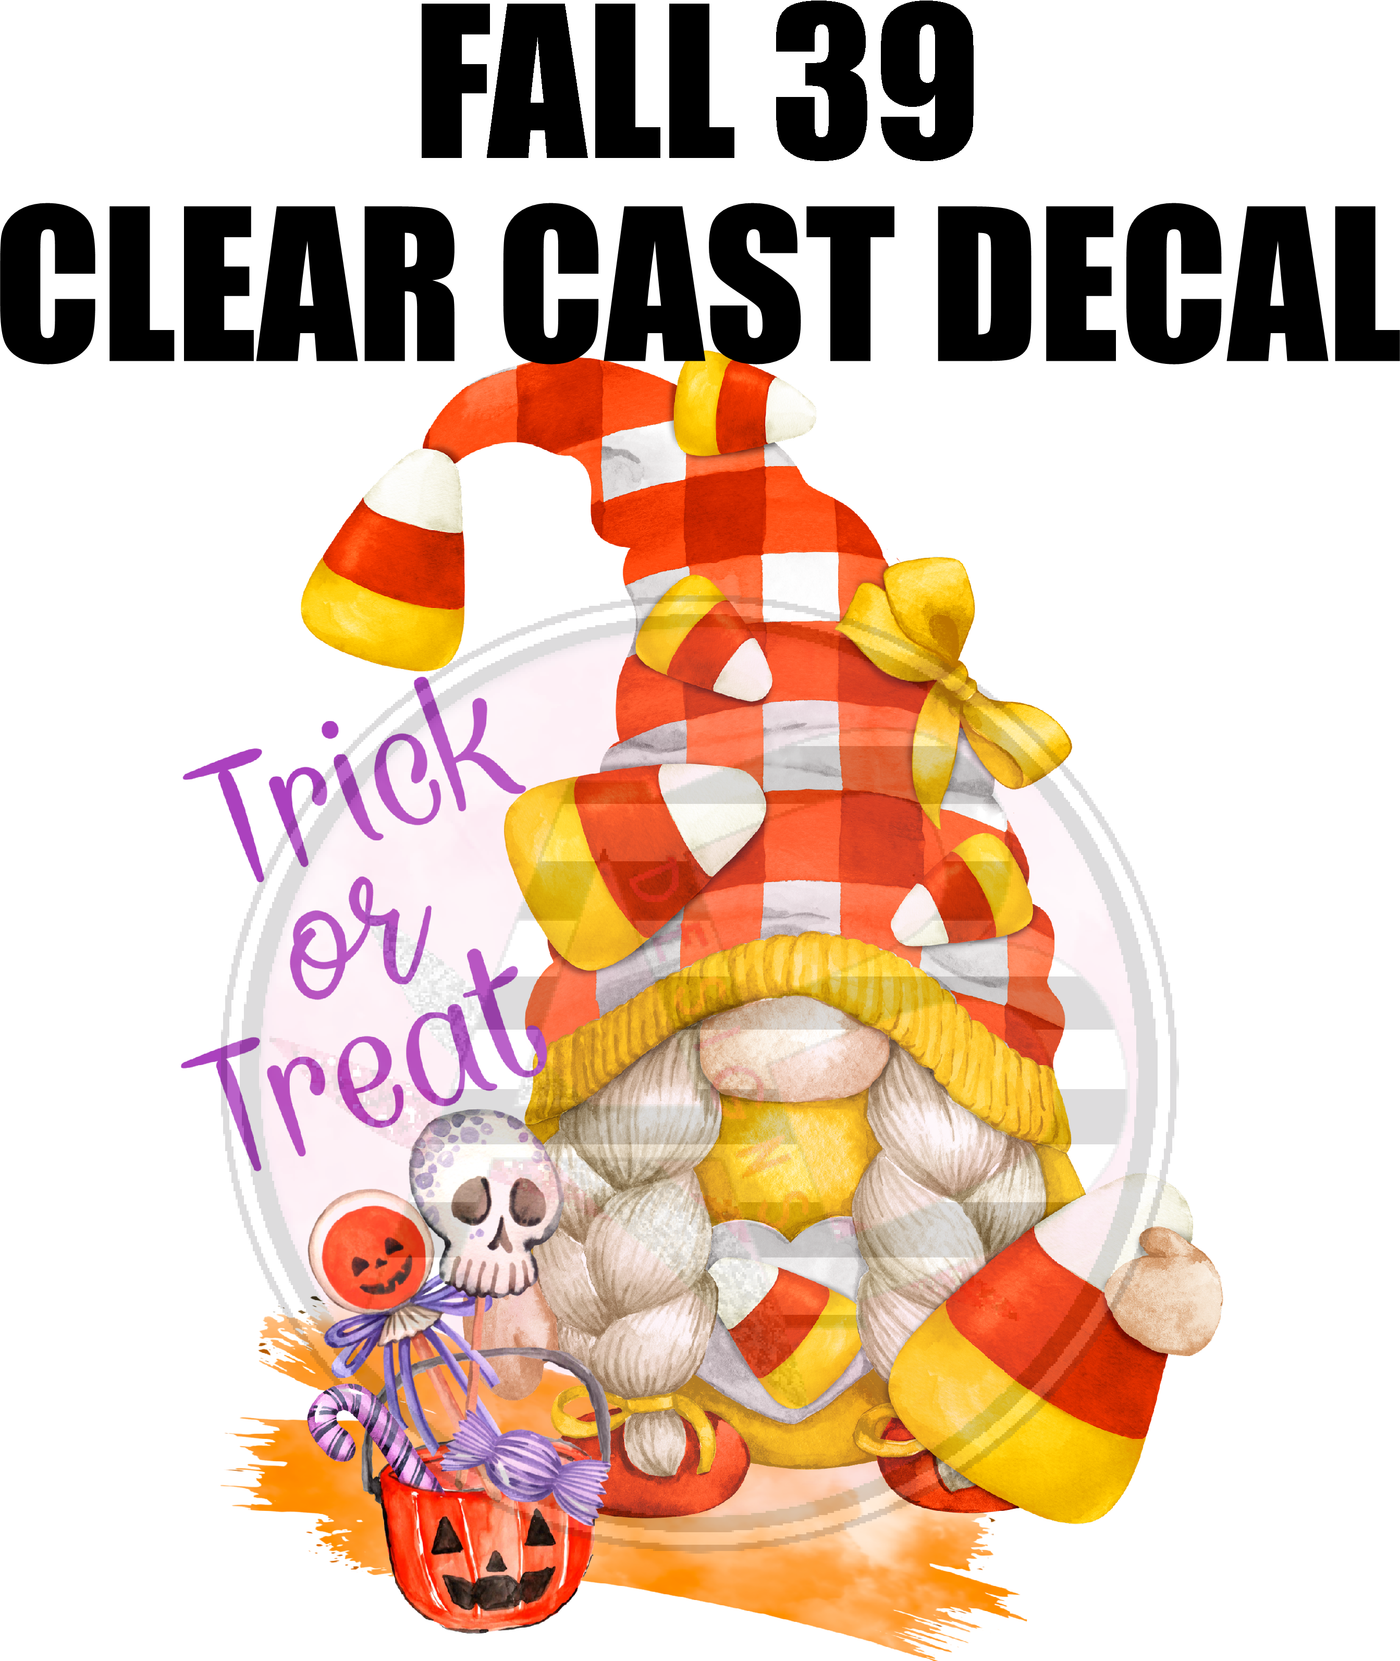 Fall 39 - Clear Cast Decal